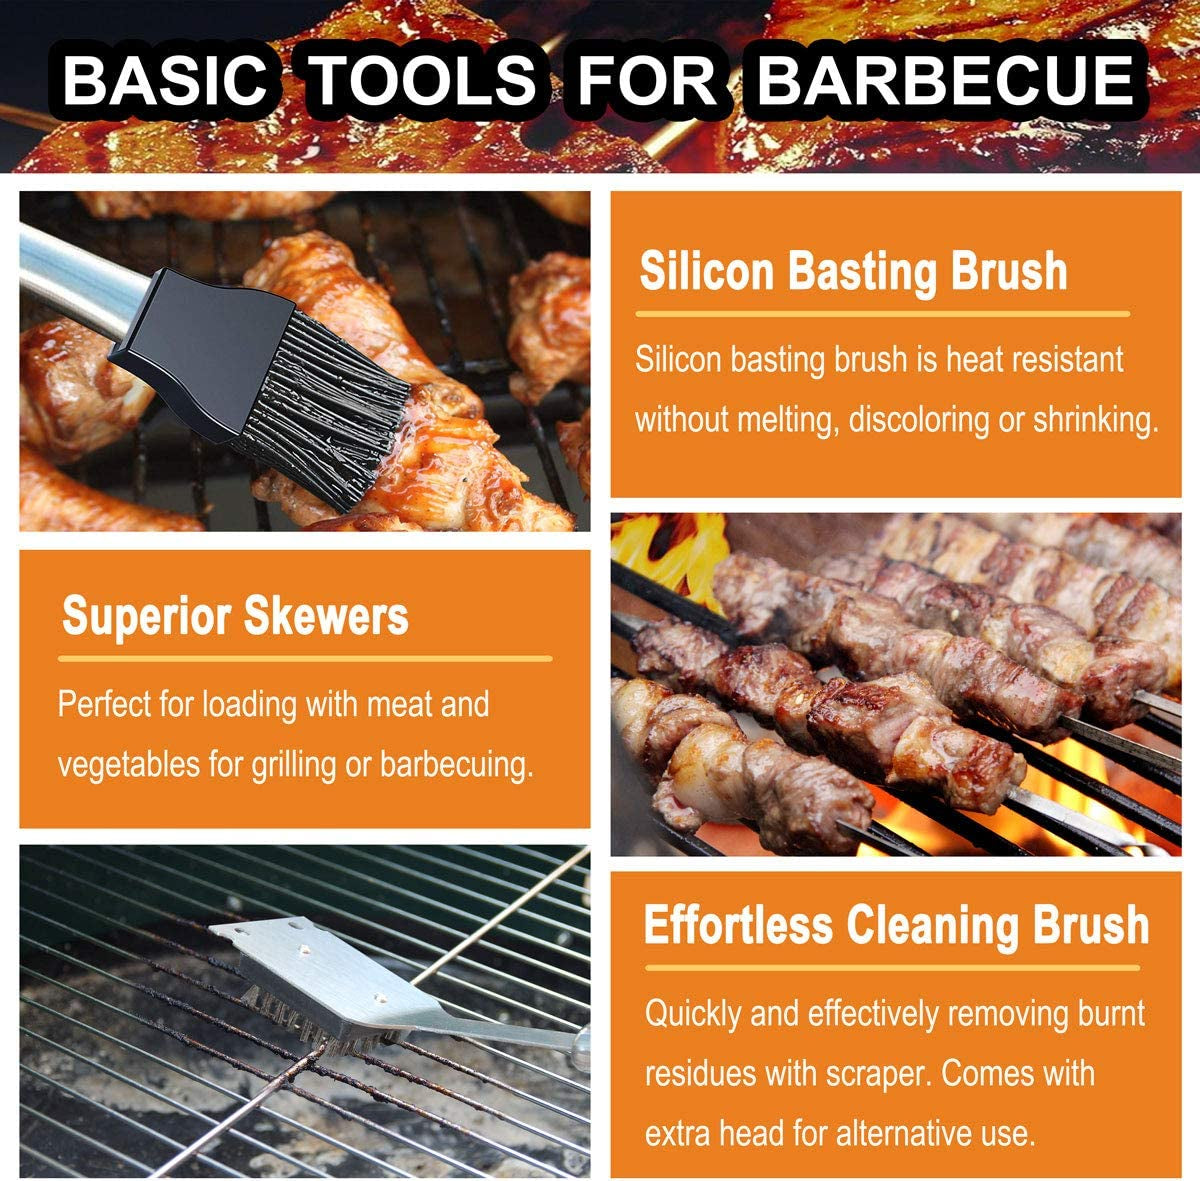 Professional Grade 31-Piece Stainless Steel BBQ Grilling Tool Set with Storage Bag - Ideal for Camping, Tailgating, and Father's Day - For Men and Women